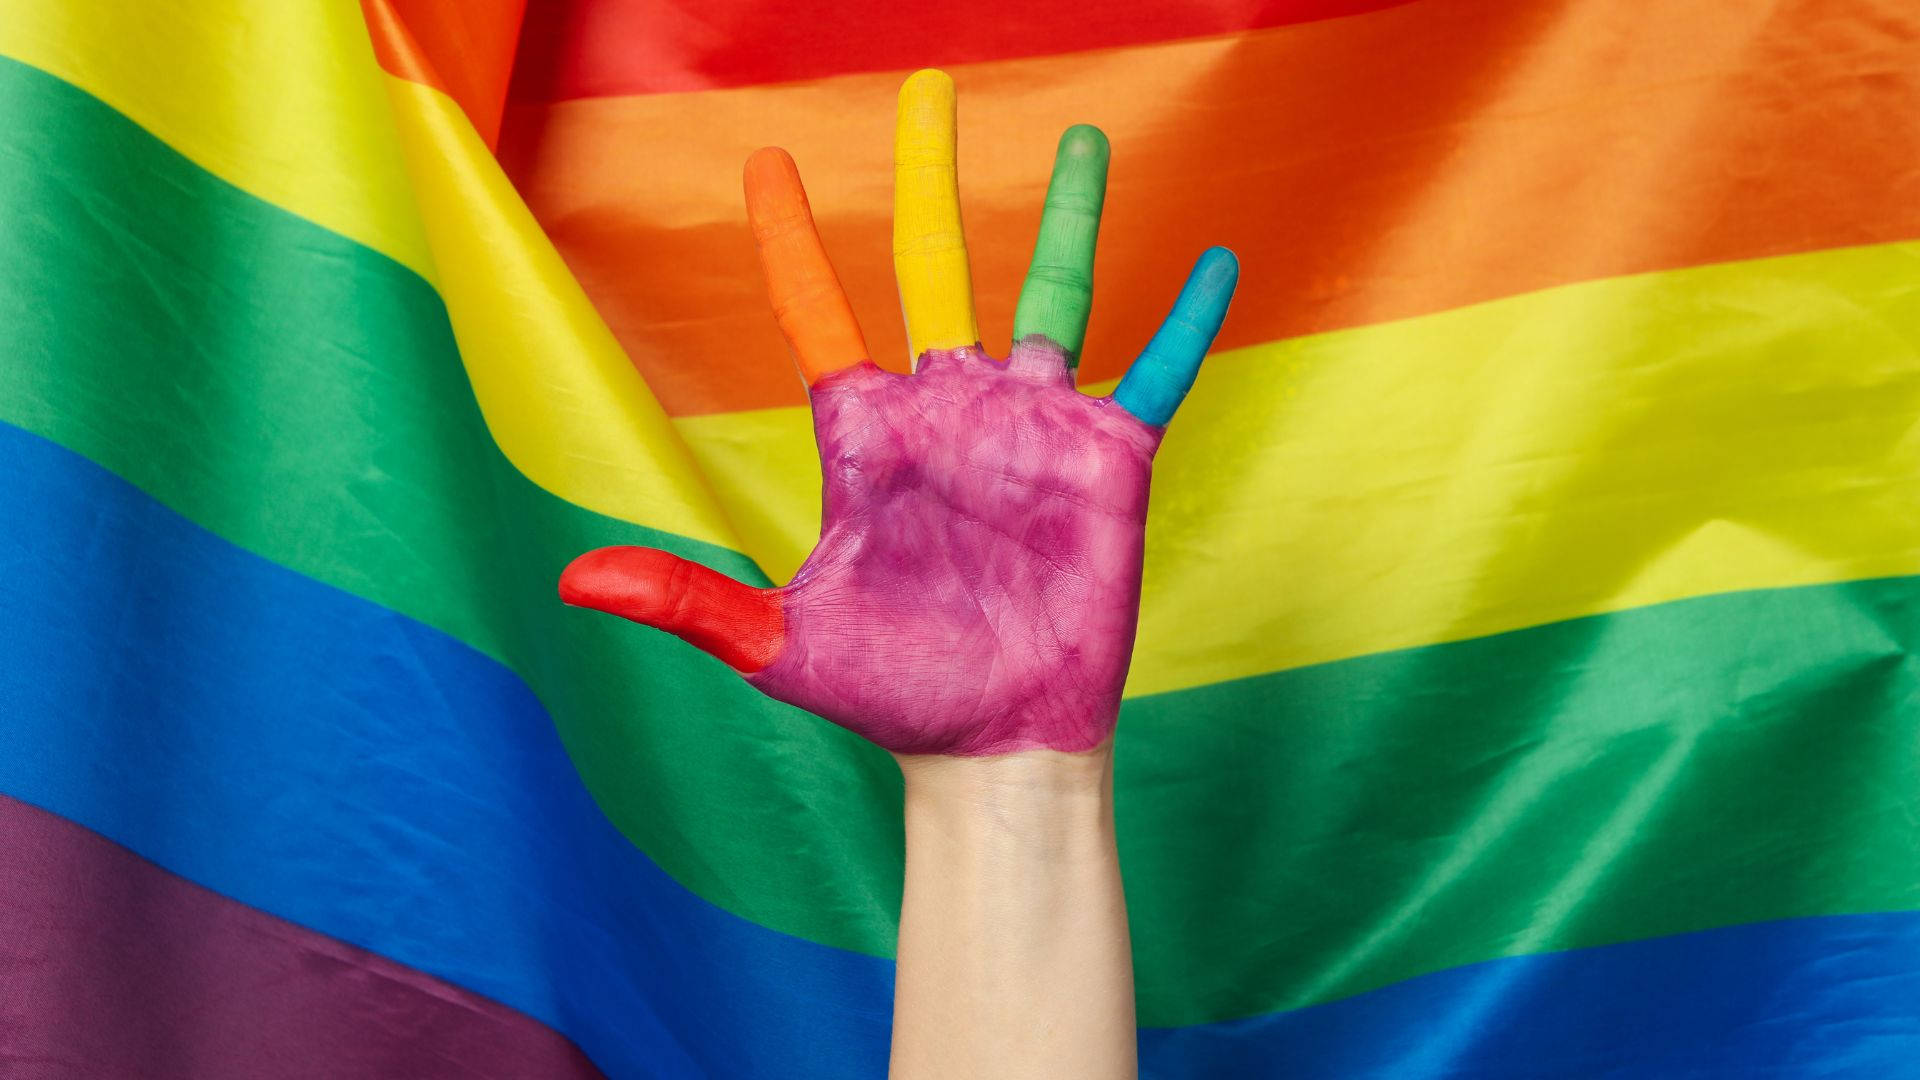 A Woman's Hand Painted With Rainbow Colors Is Raised Up Against A Rainbow Flag Wallpaper